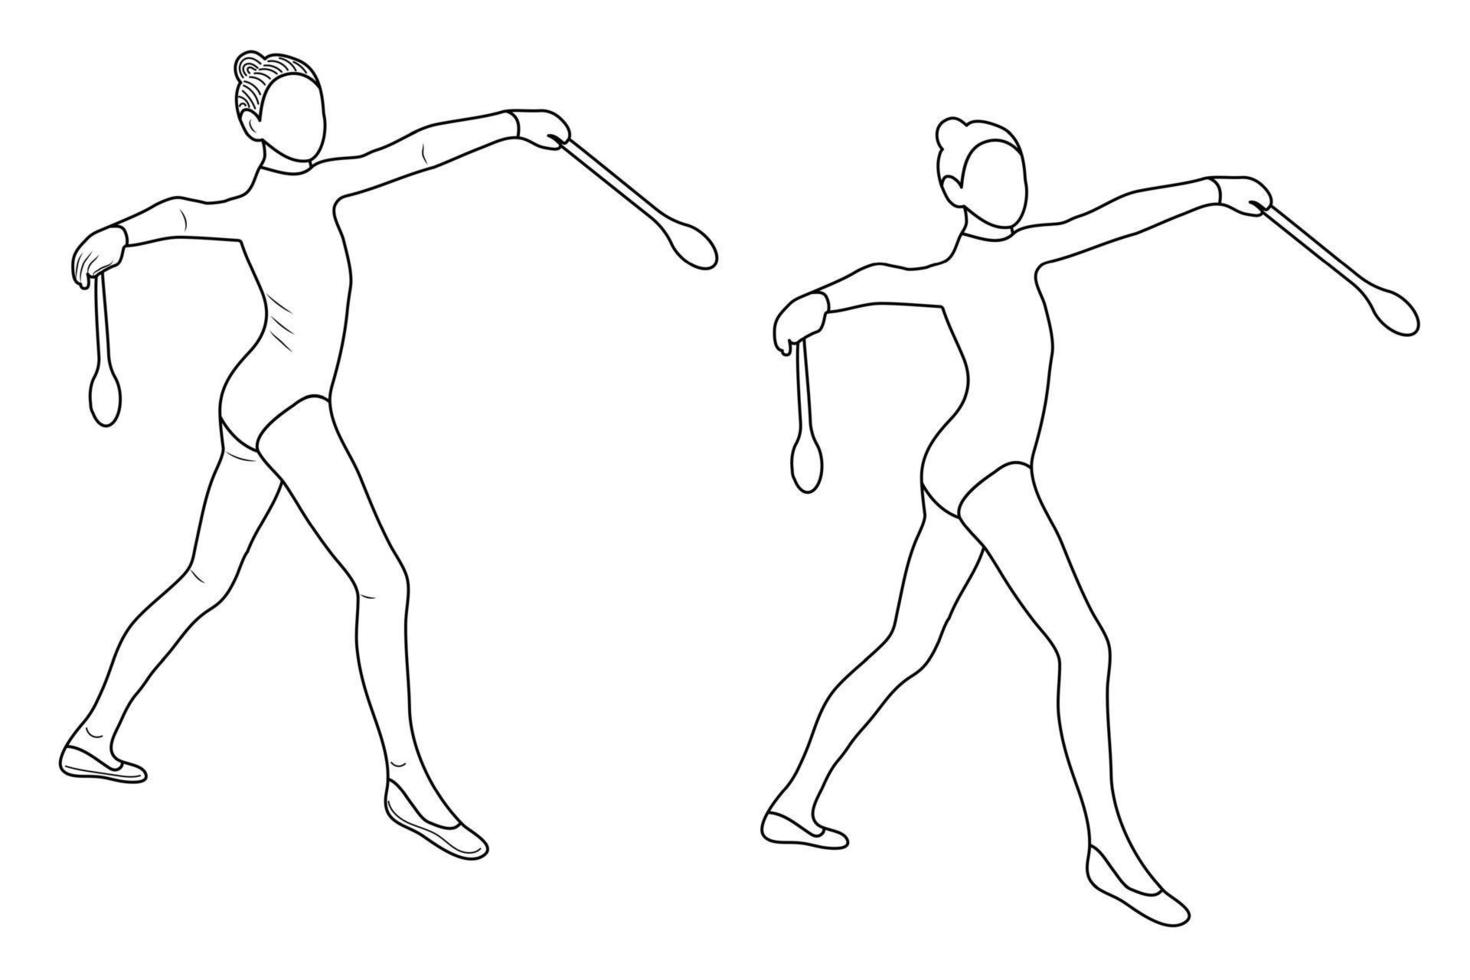 Outline figure of a gymnast in a sports pose. Gym girl silhouette sketch. Gymnastics. vector